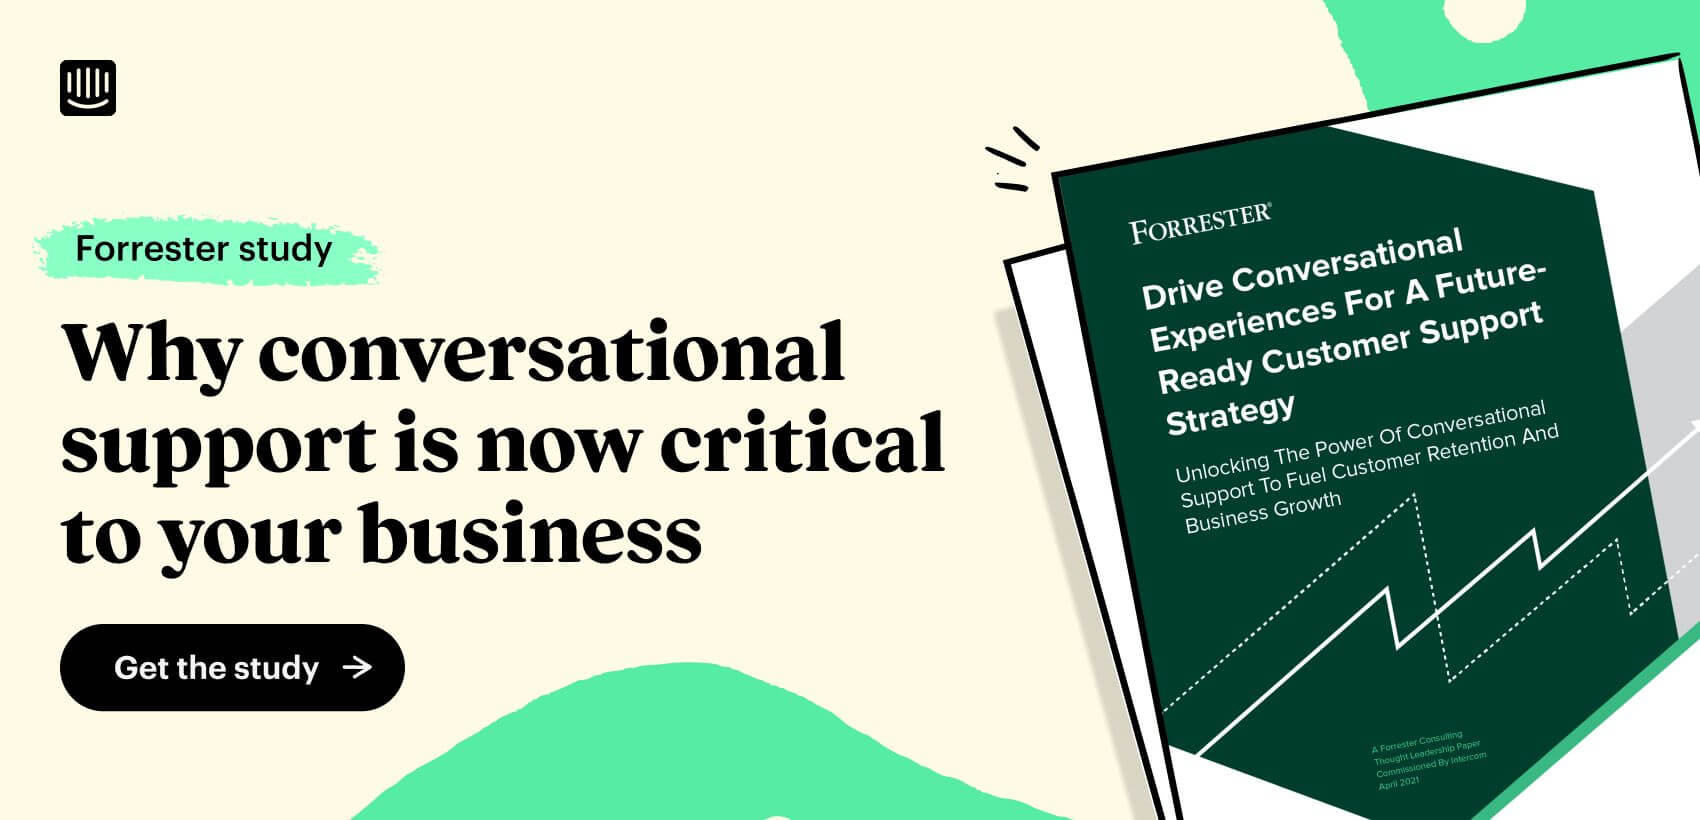 Why conversational support is now critical to your business – get the report